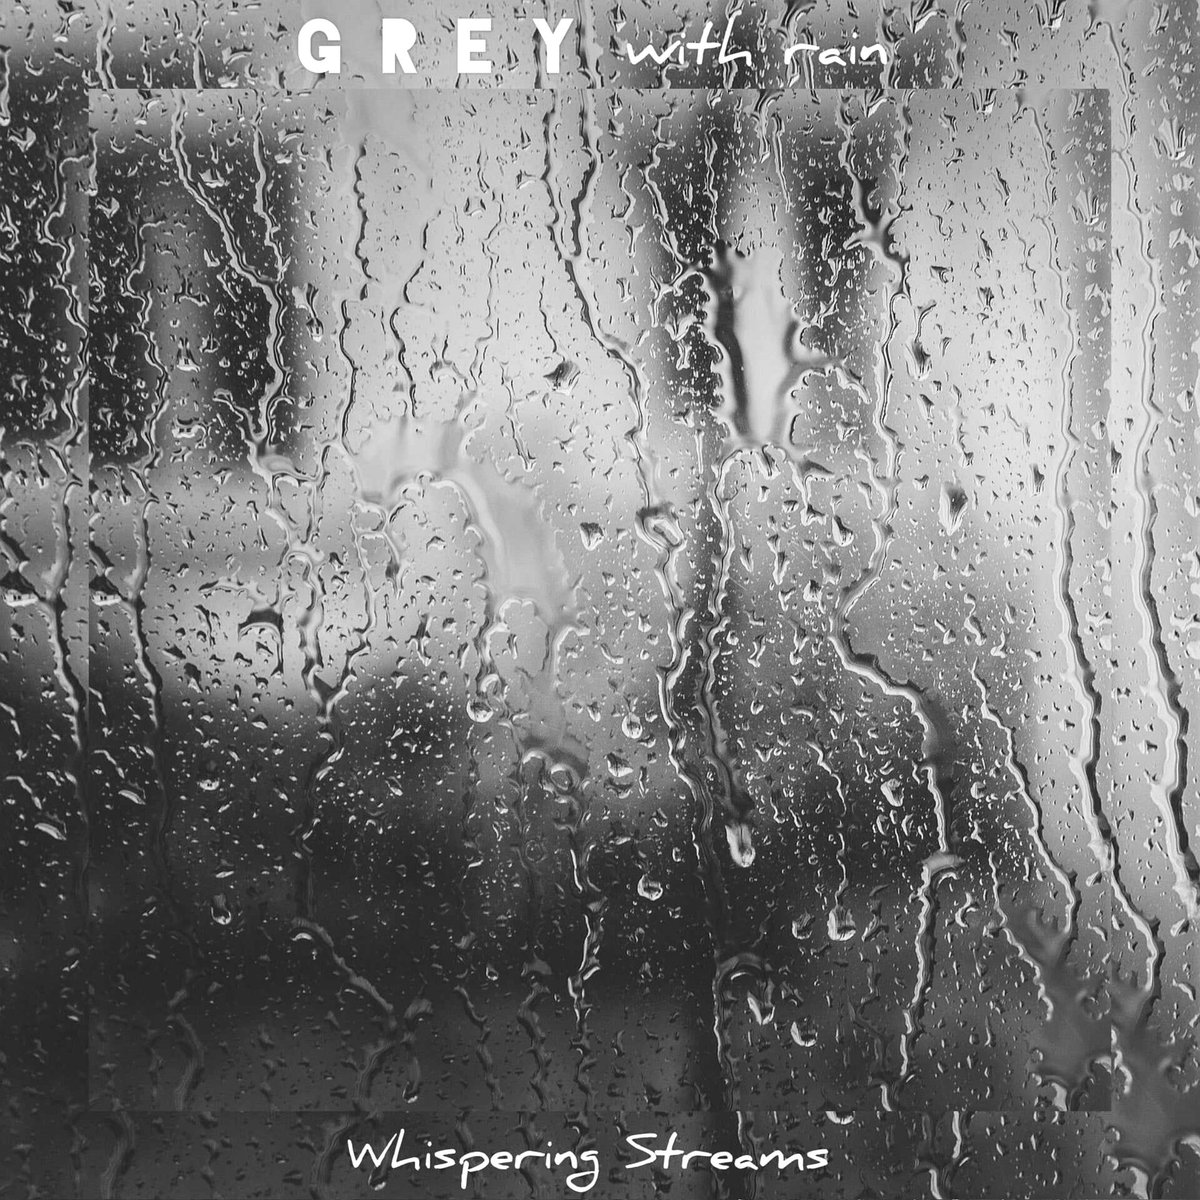 G R E Y, now also with rain sound! Out on all streaming services 🎶 youtube.com/playlist?list=… open.spotify.com/album/5wz6WOSE…